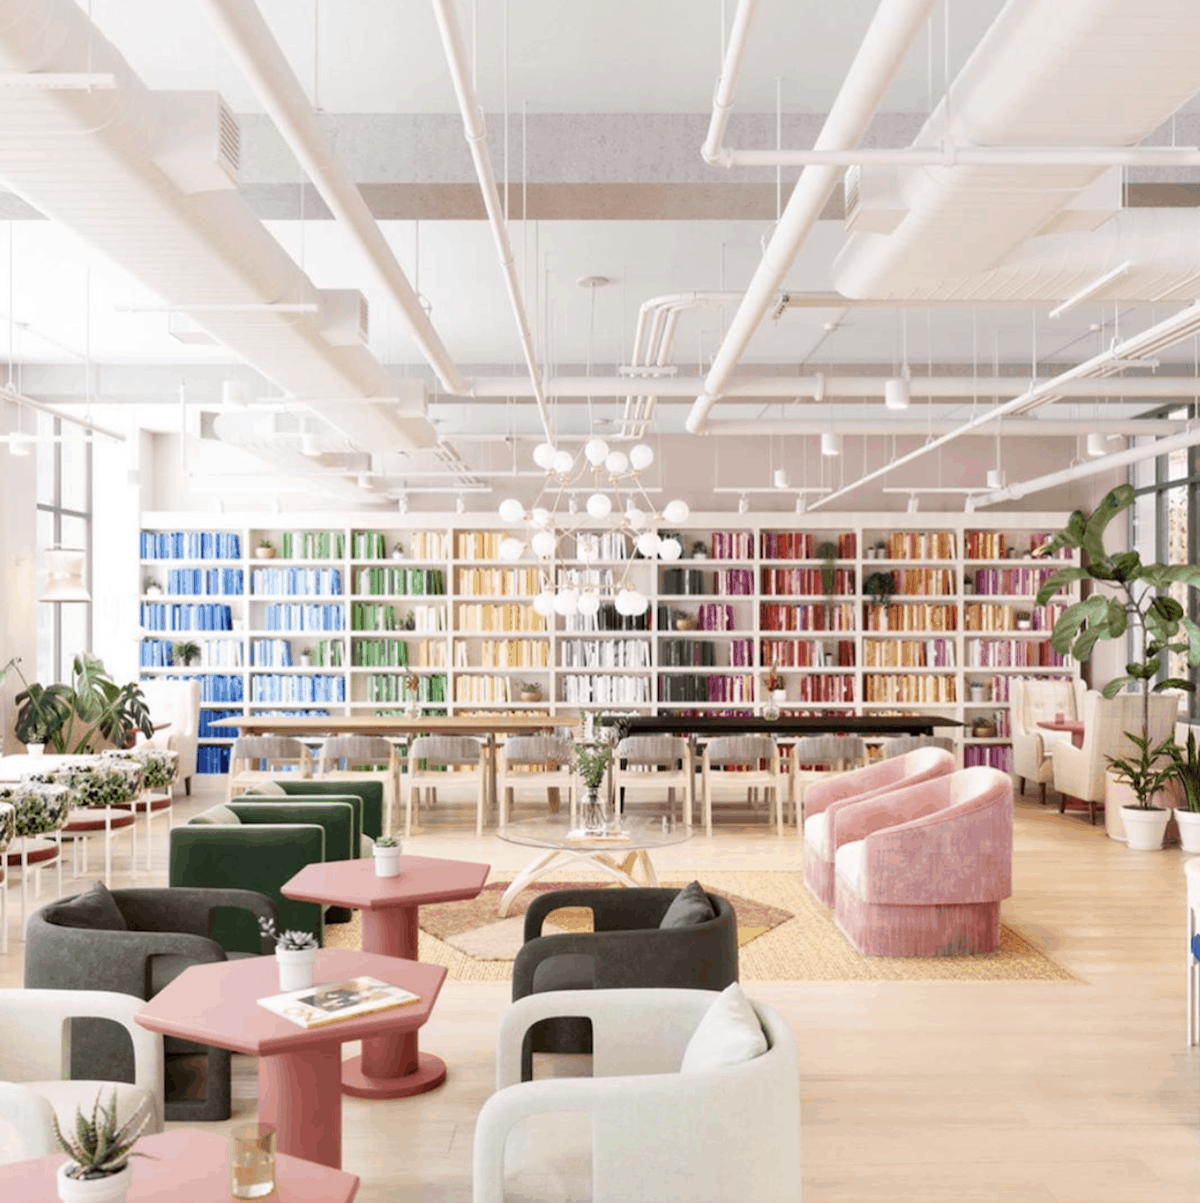 The Wing is a co-worker space designed for women in London